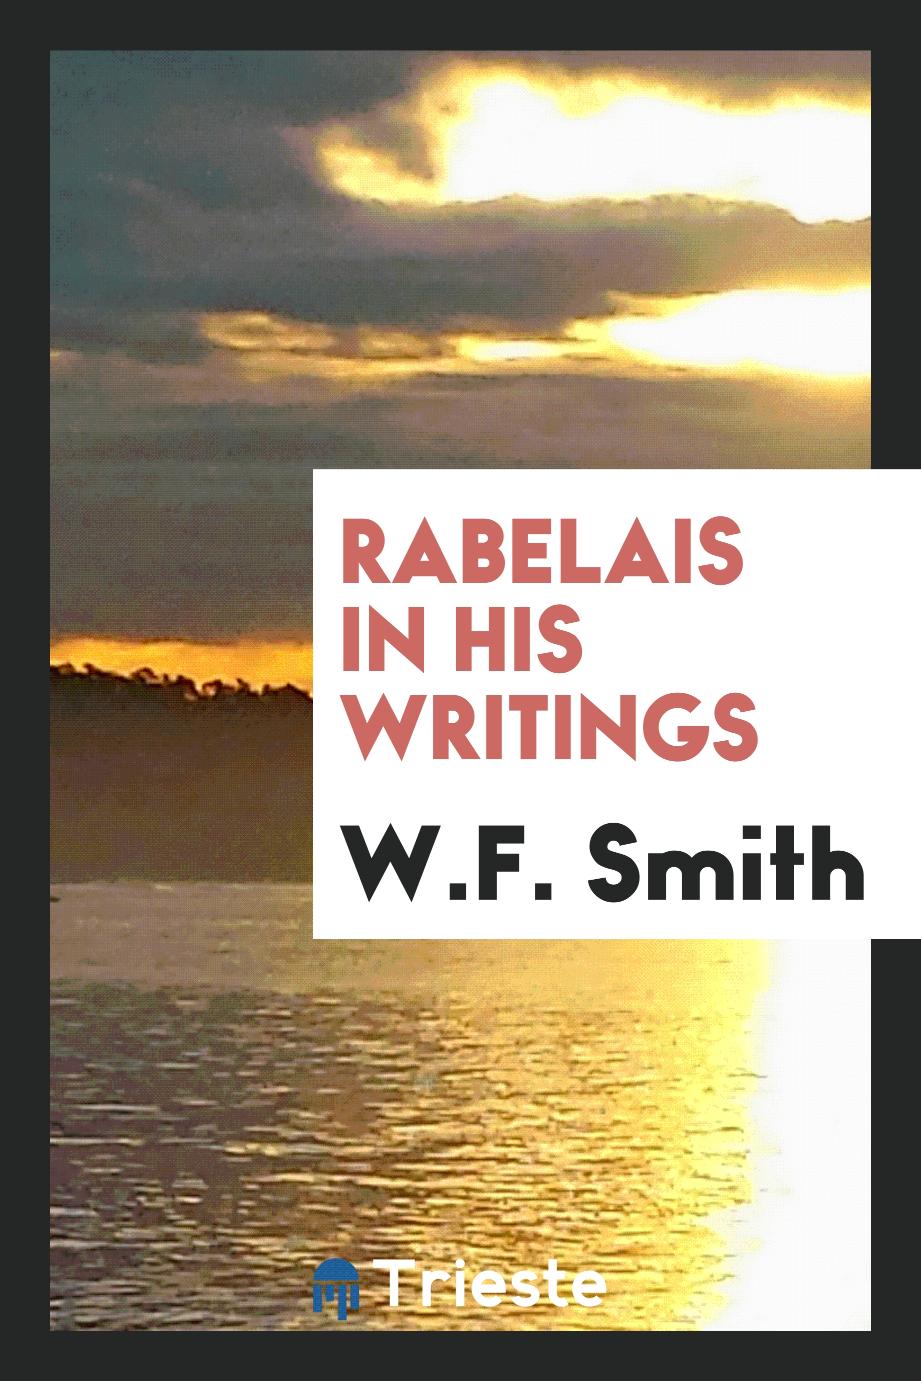 Rabelais in his writings